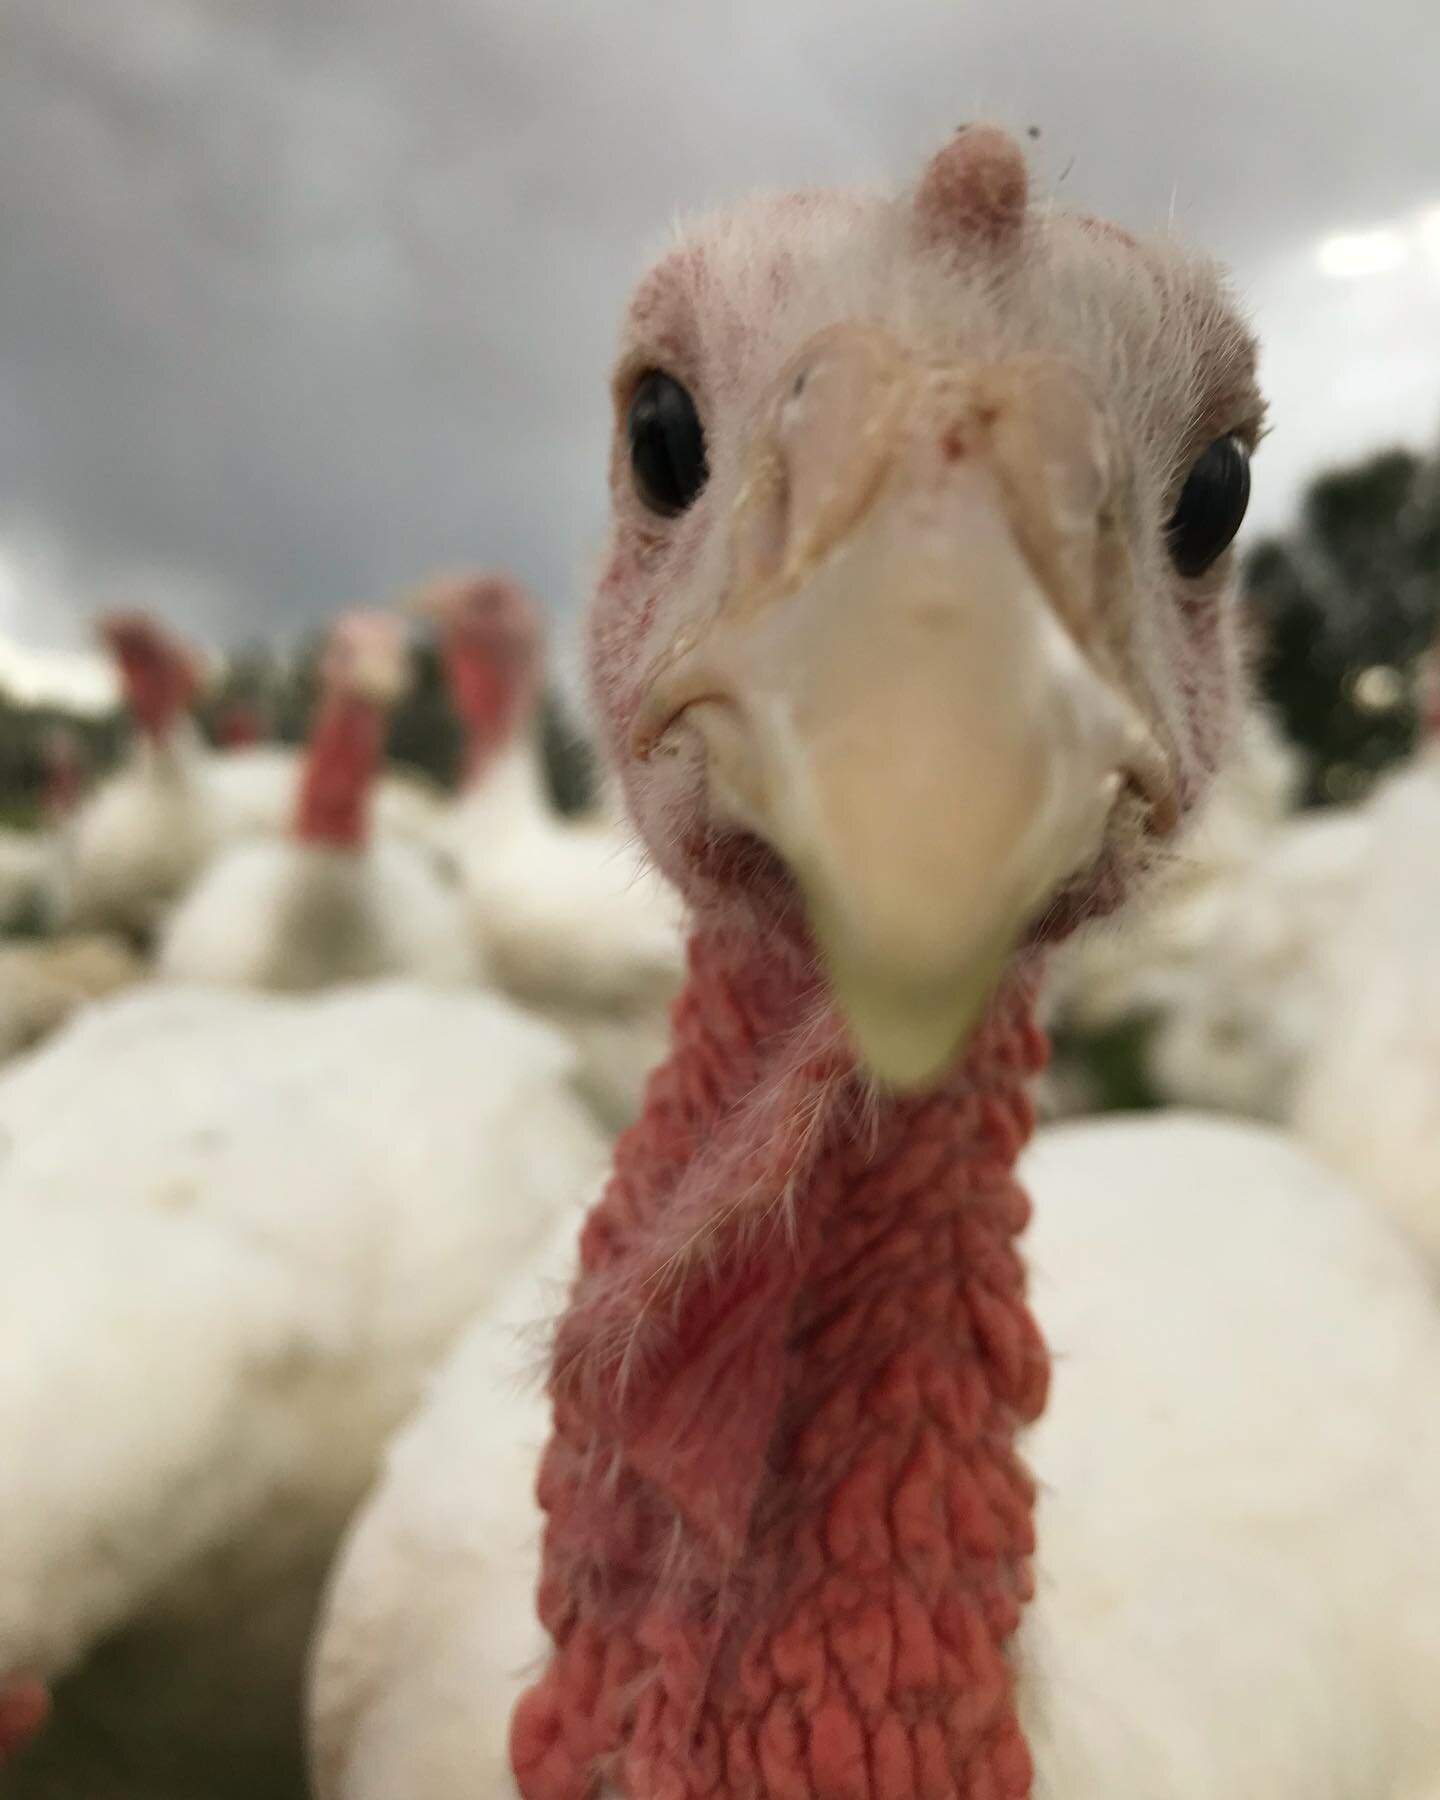 We are, once again, raising turkeys for the holiday season, which will be here before we know it. We will put them on our website for purchase in early to mid October. To be the first to know, sign up for our email list&mdash;link is in our bio. They